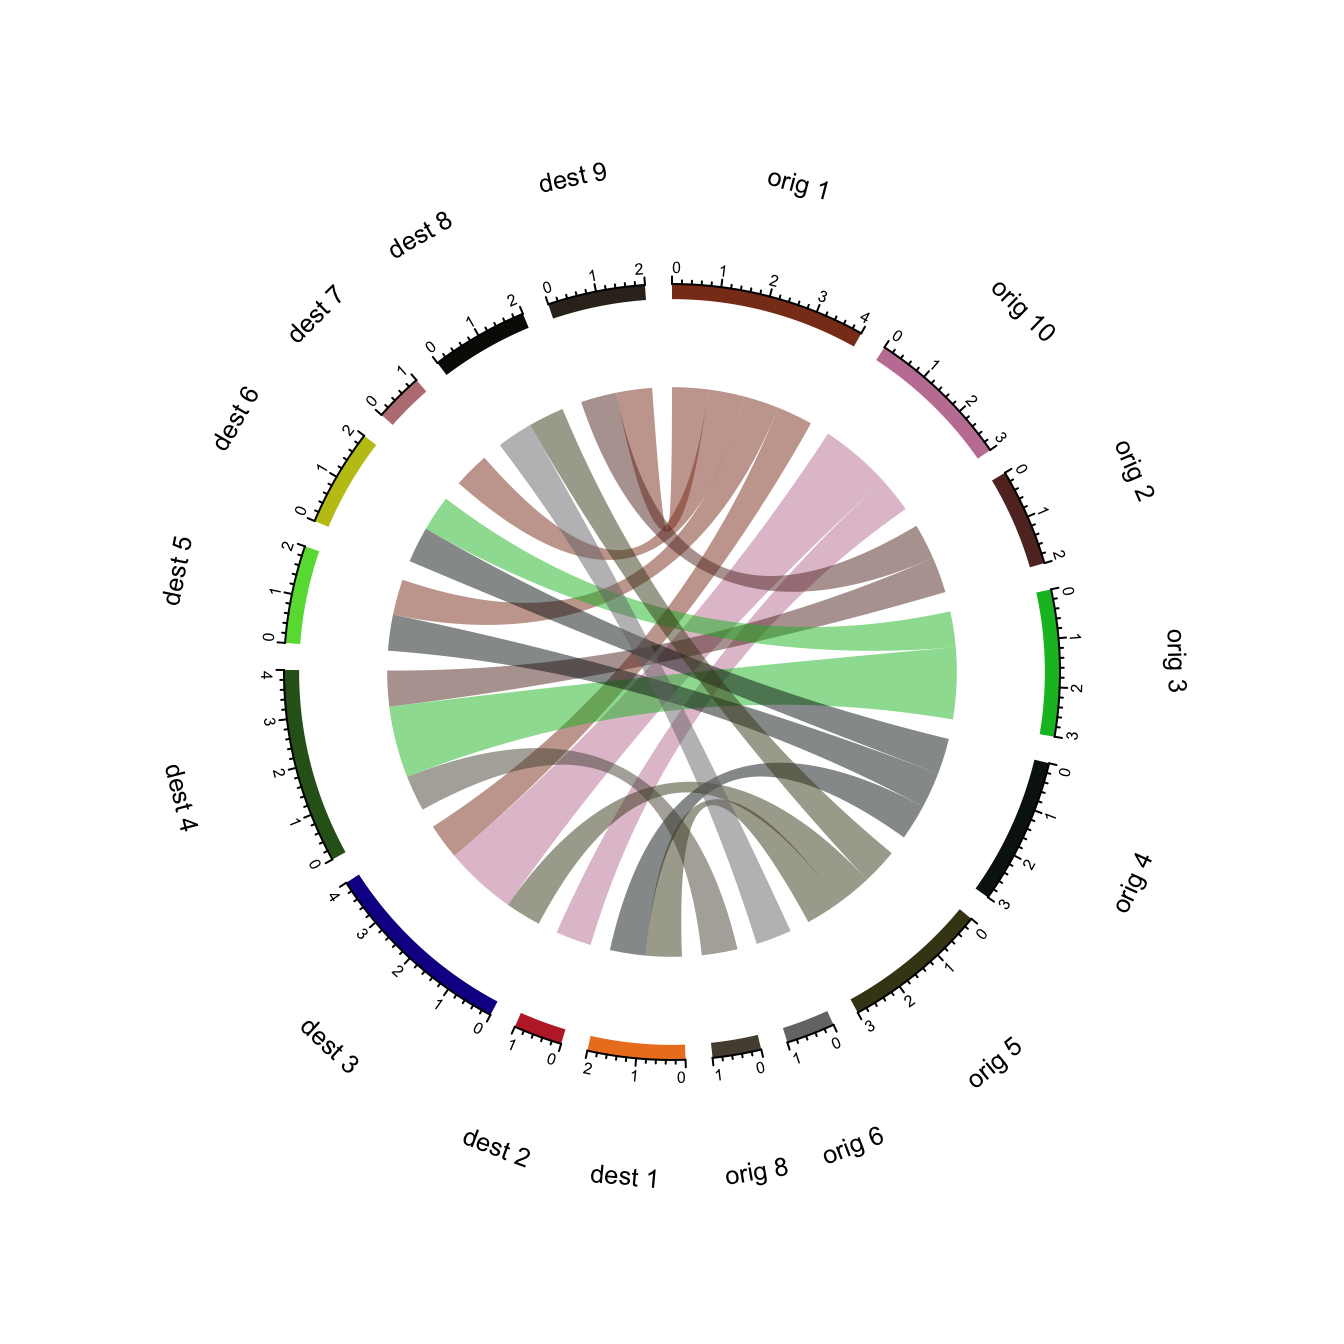 https://www.r-graph-gallery.com/123-circular-plot-circlize-package-2_files/figure-html/thecode2-1.png